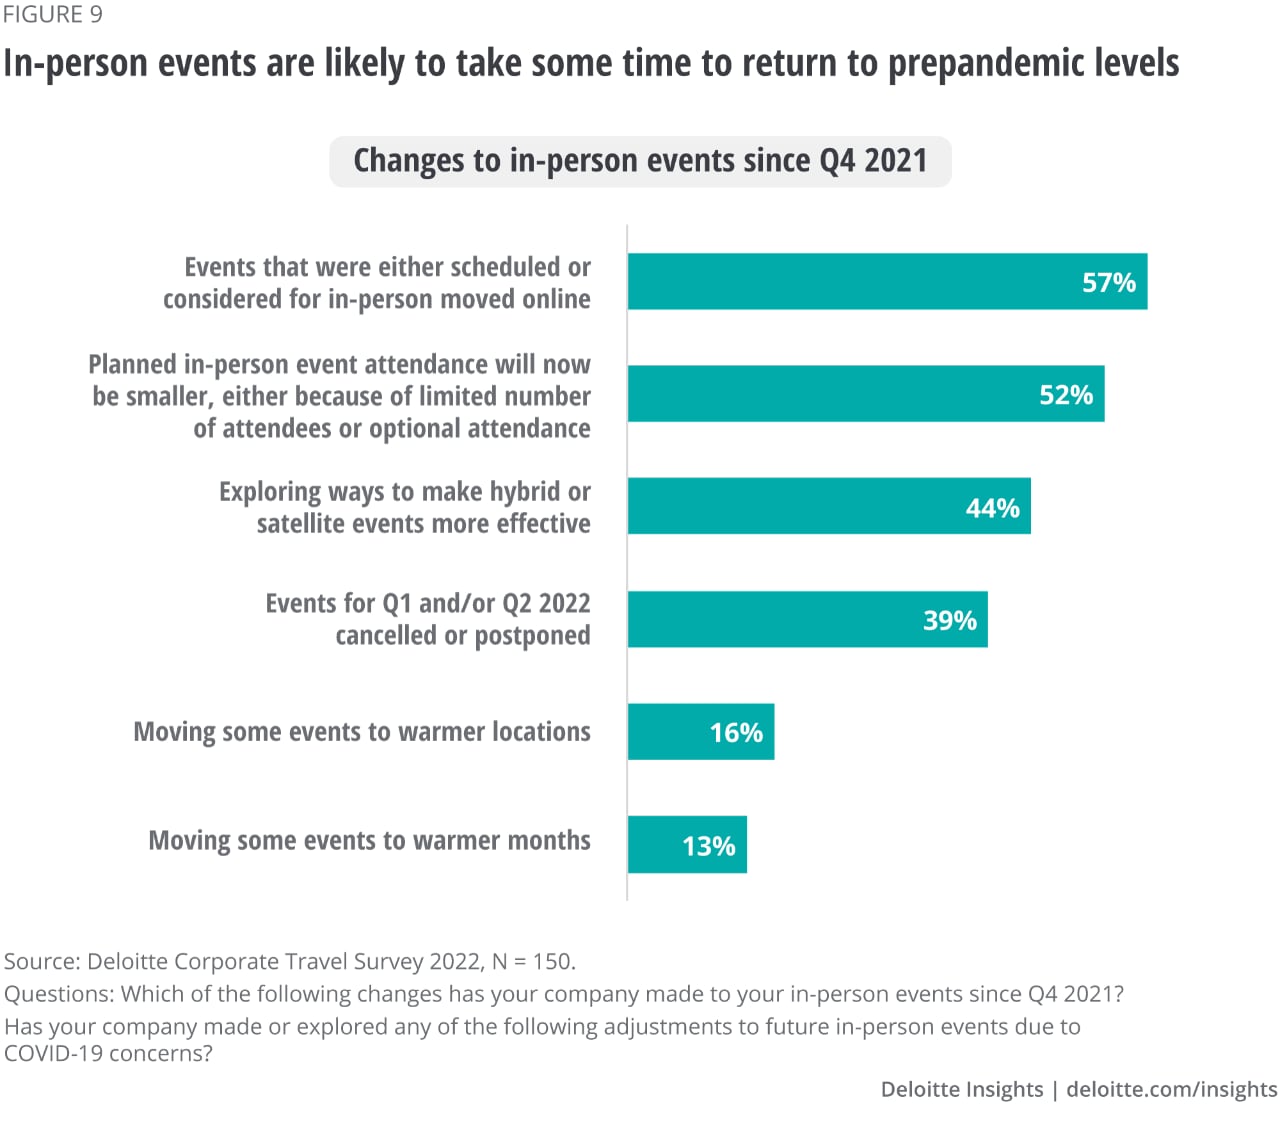 Figure 9. In-person events are likely to take some time to return to prepandemic levels